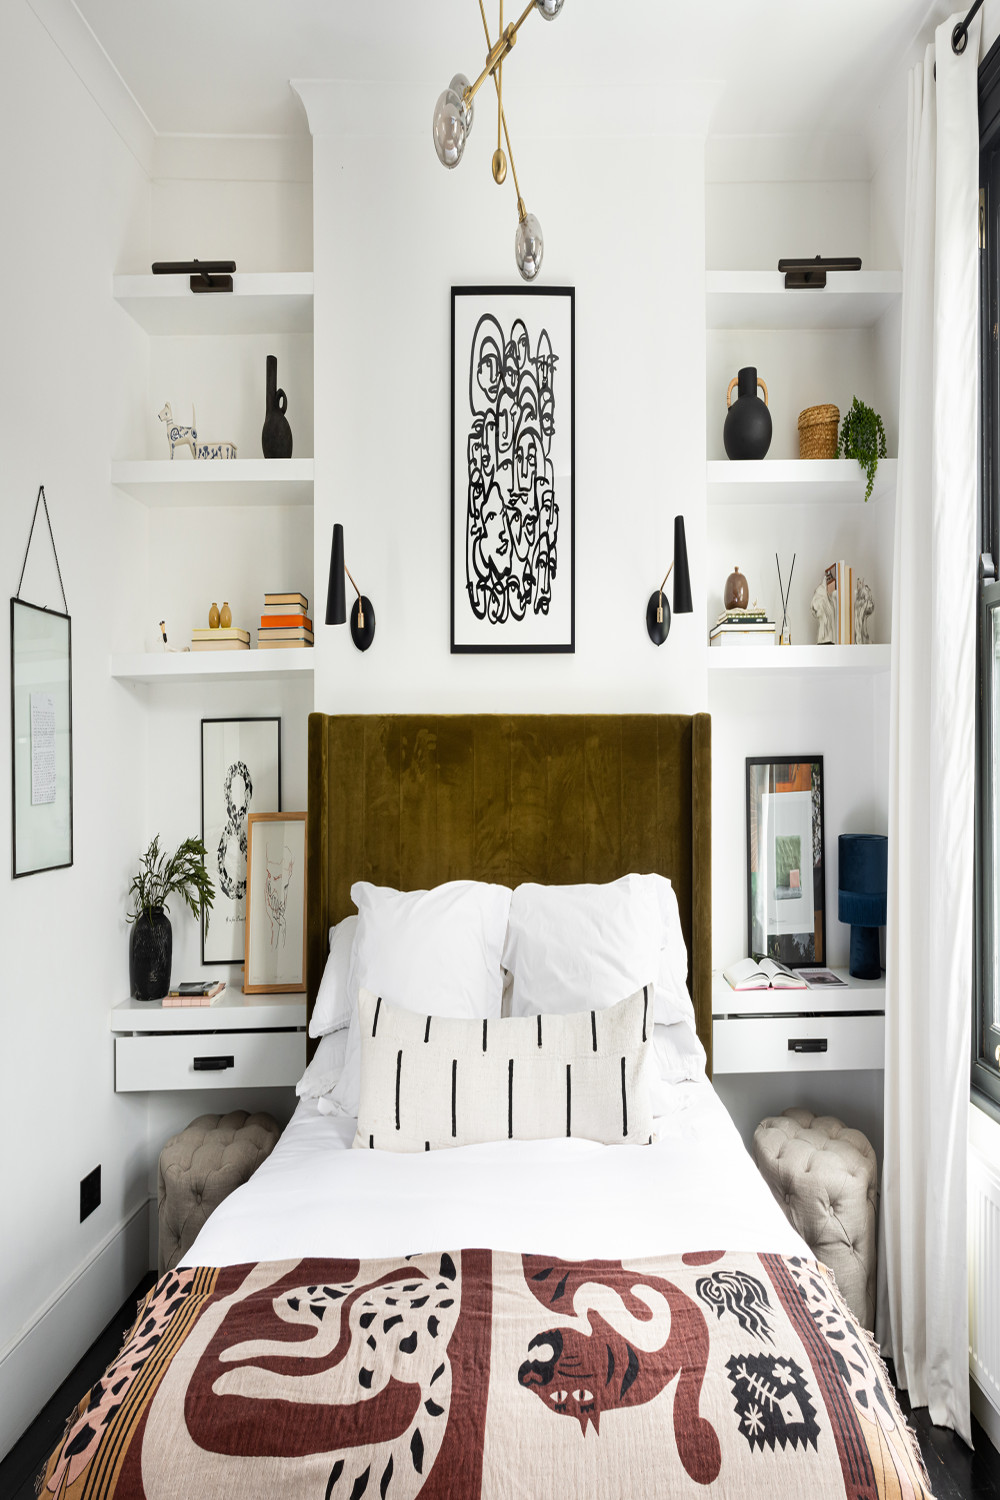 Bedroom shelving ideas –  ways to add storage and style to your